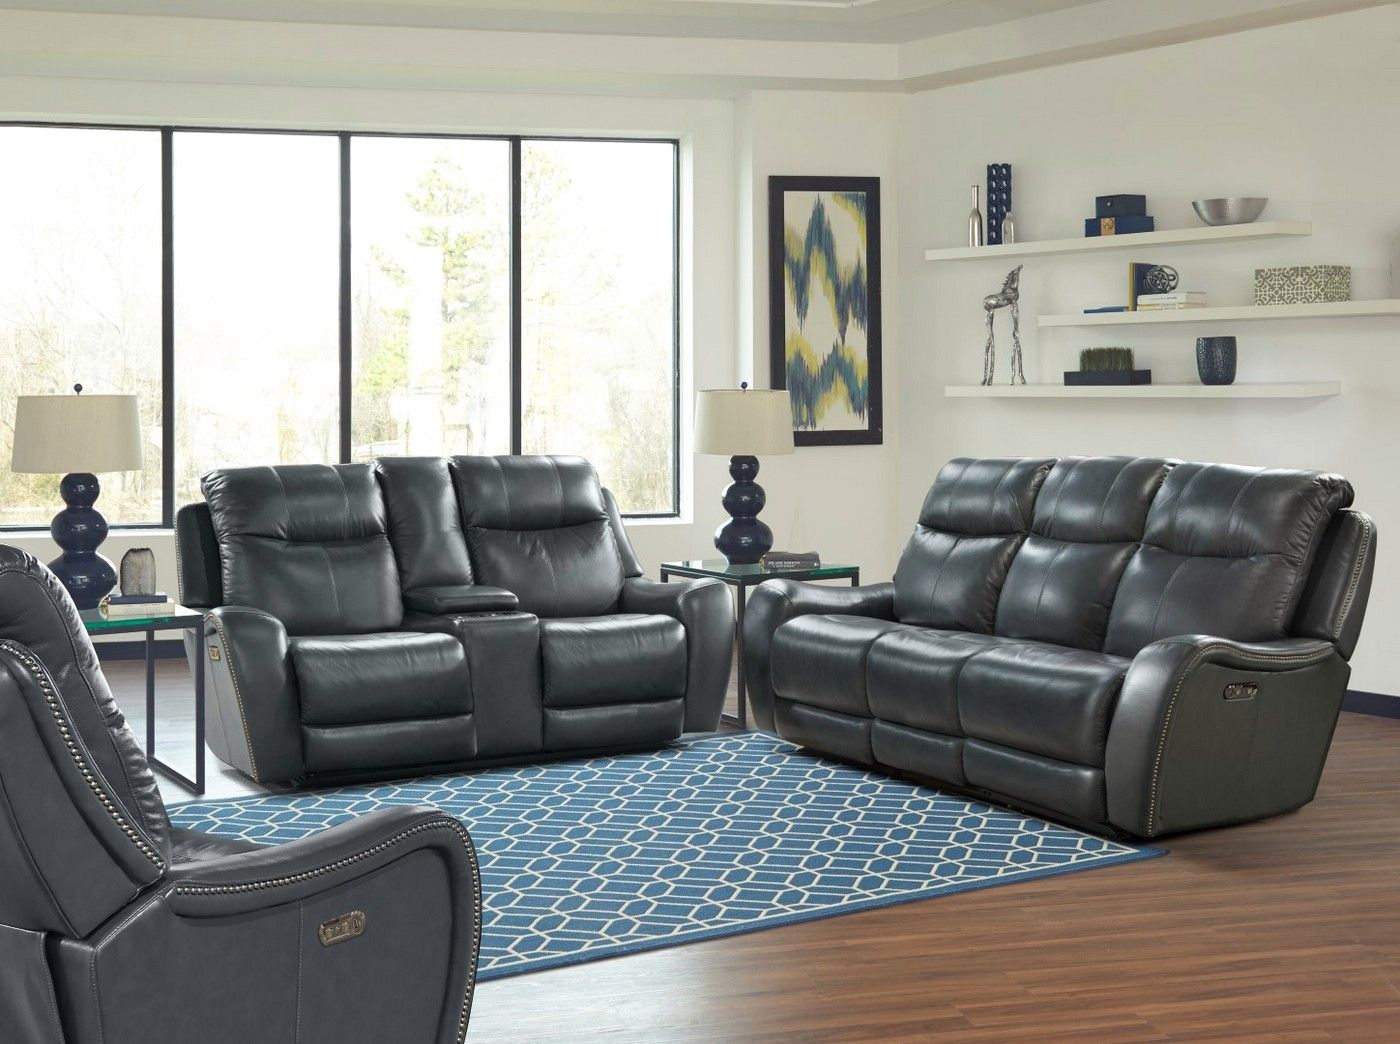 Mammoth Denim Transitional Power Dual Reclining Leather Regarding Lannister Dual Power Reclining Sofas (View 3 of 12)